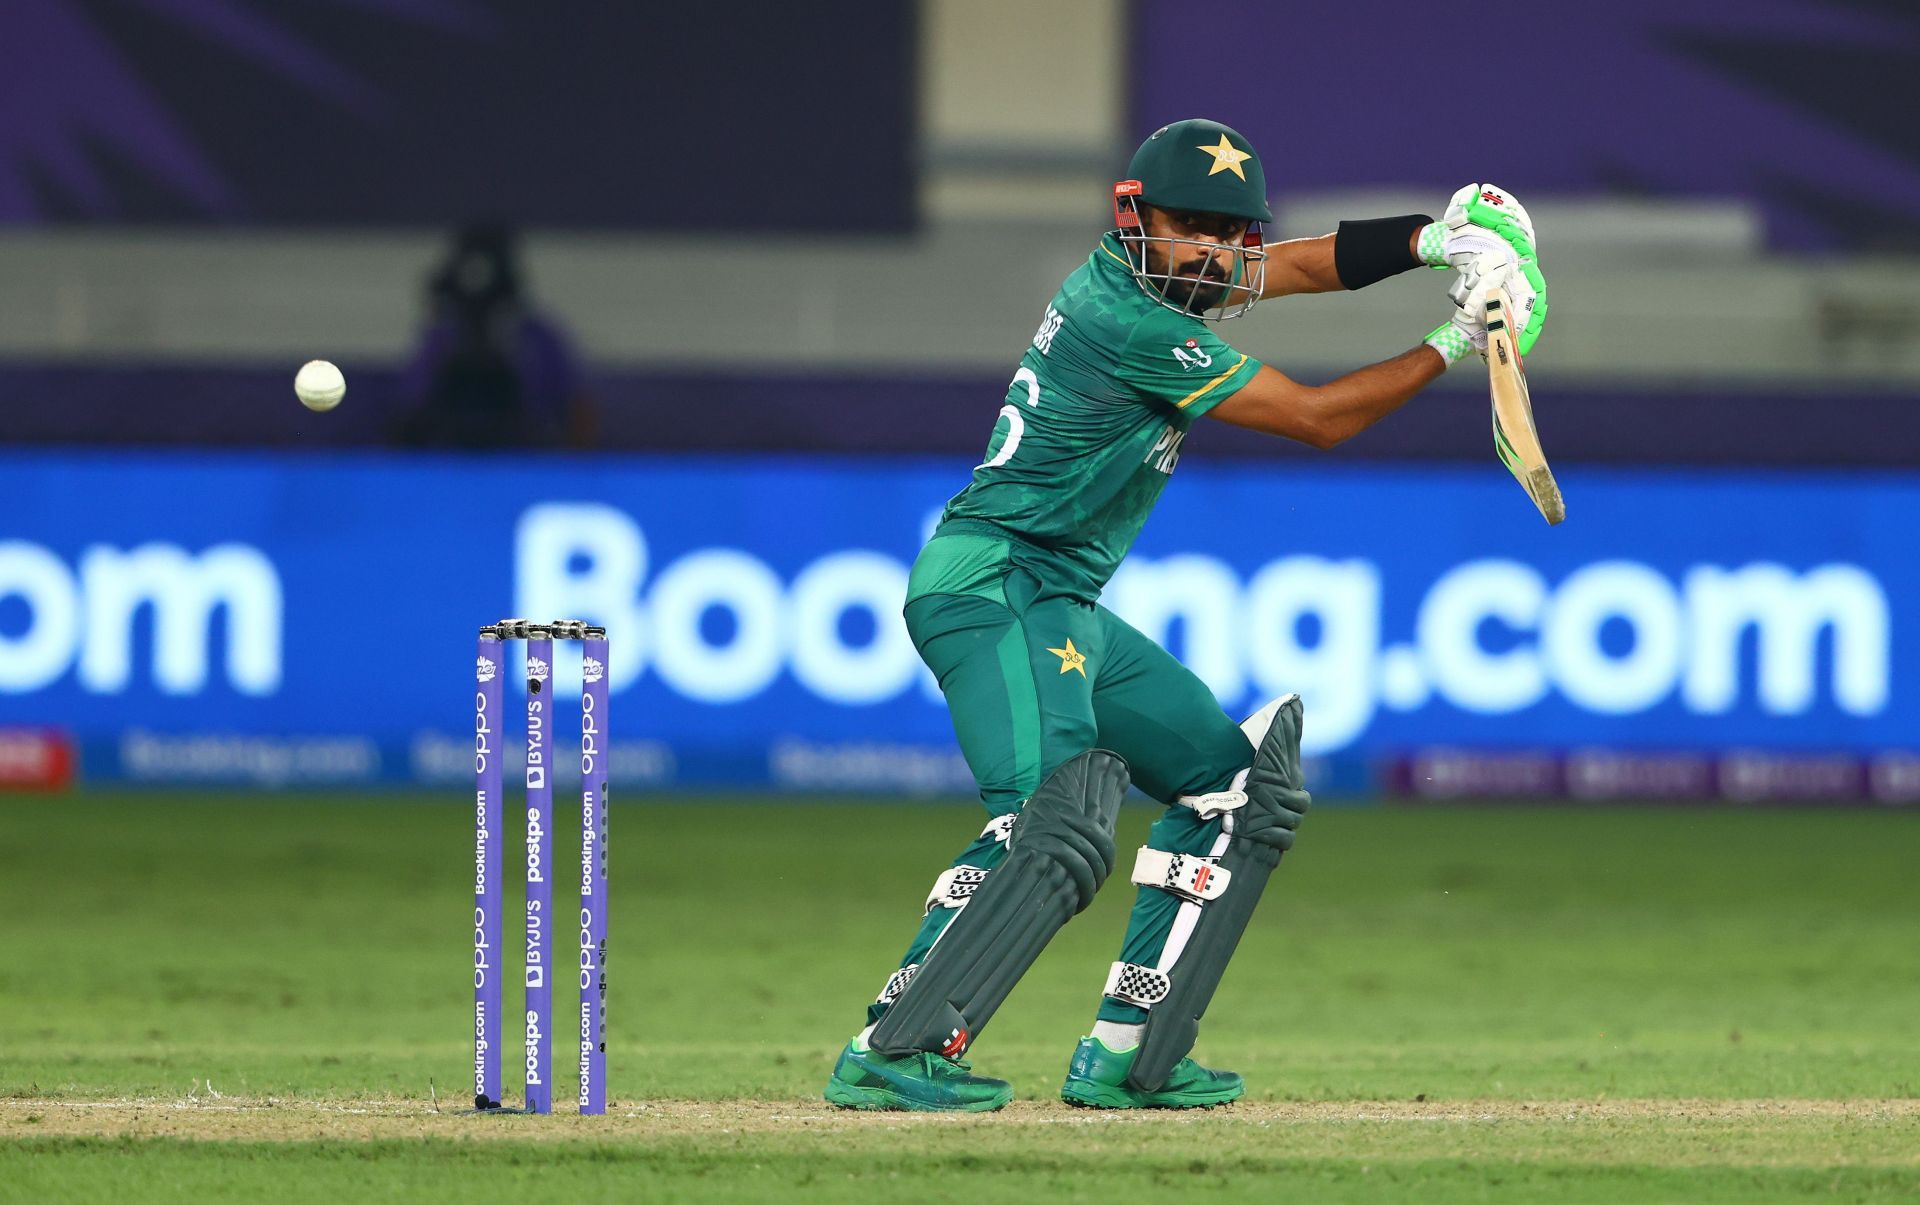 Babar Azam - class, consistency and skill personified!